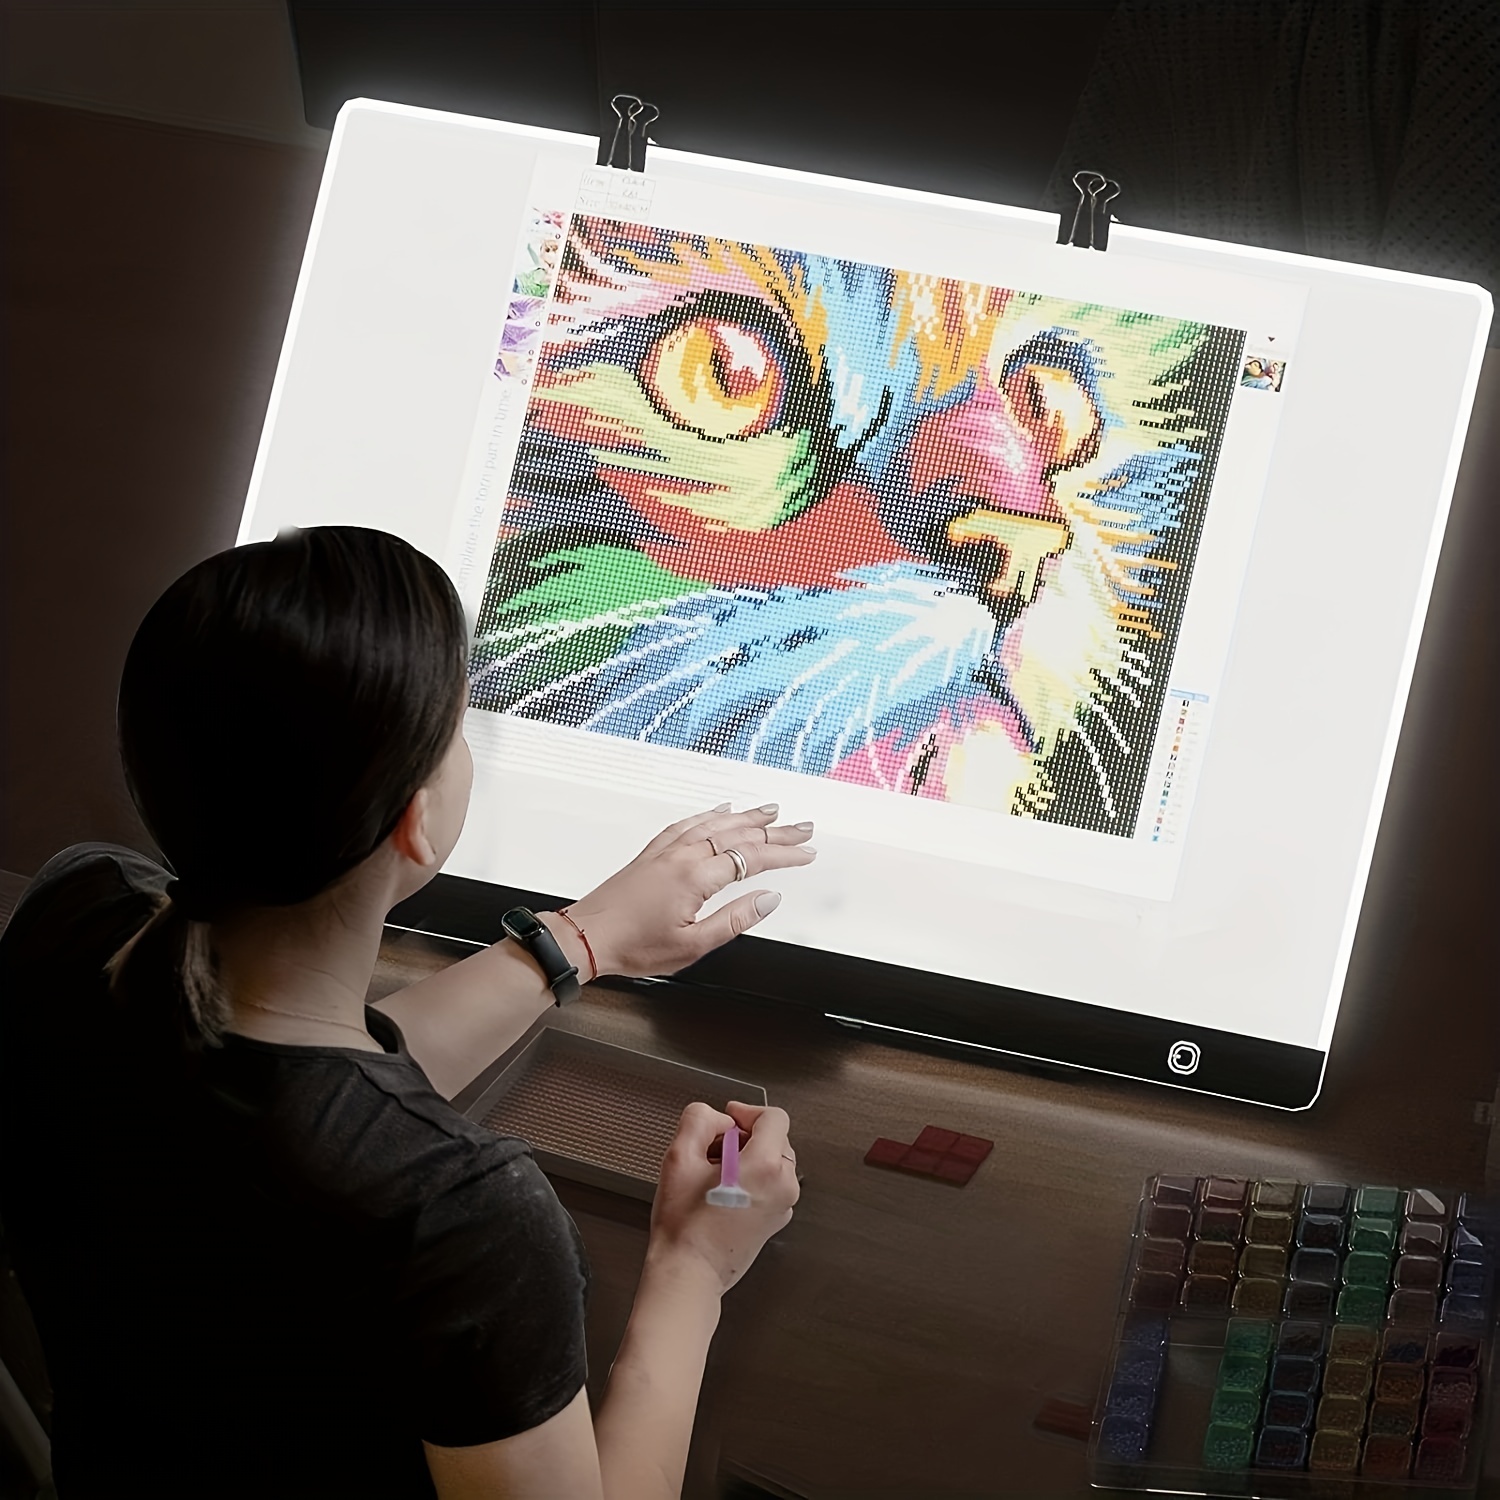  Mlife LED Light Pad - Diamond Painting A4 Light Box Tracing  Light Board with 3 Brightness, Ideal for Sketching, Animation, Drawing  Light Box with 4 Fasten Clips